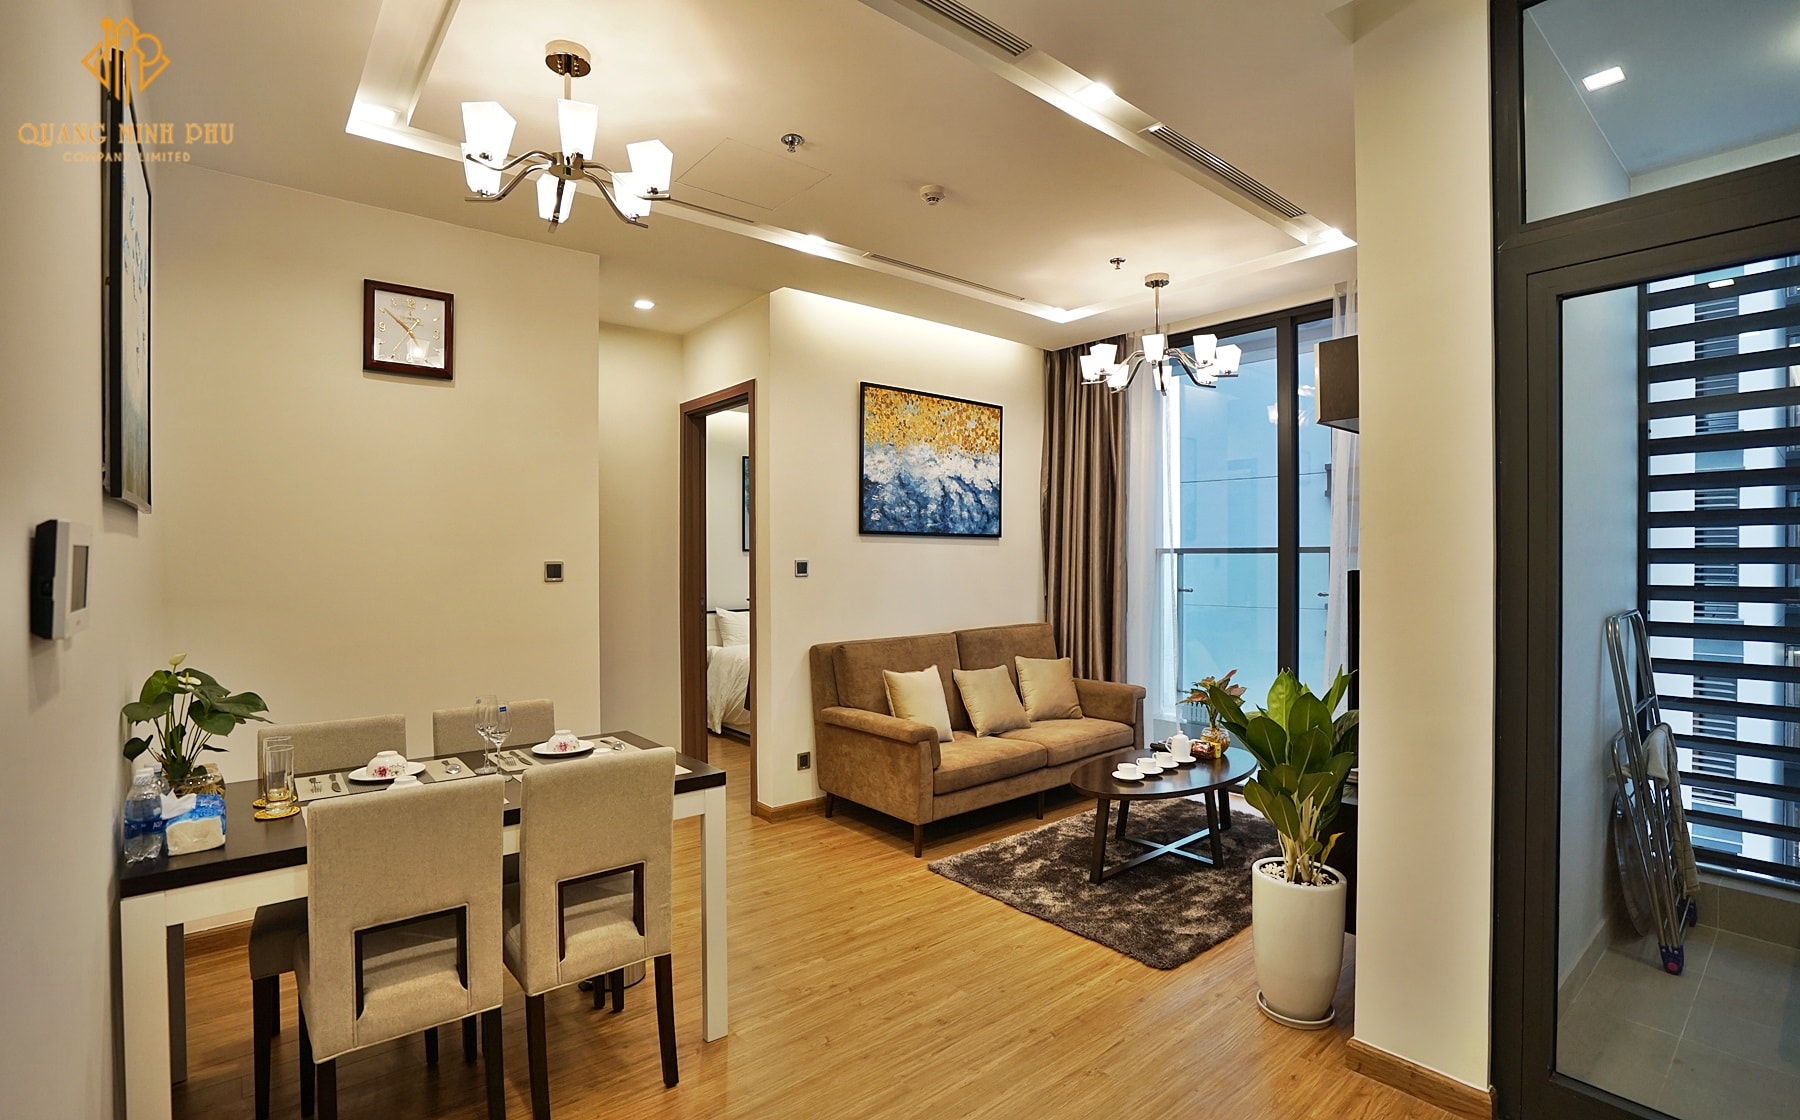 *Luxury Serviced Apartment For Rent in Vinhomes Metropolis*